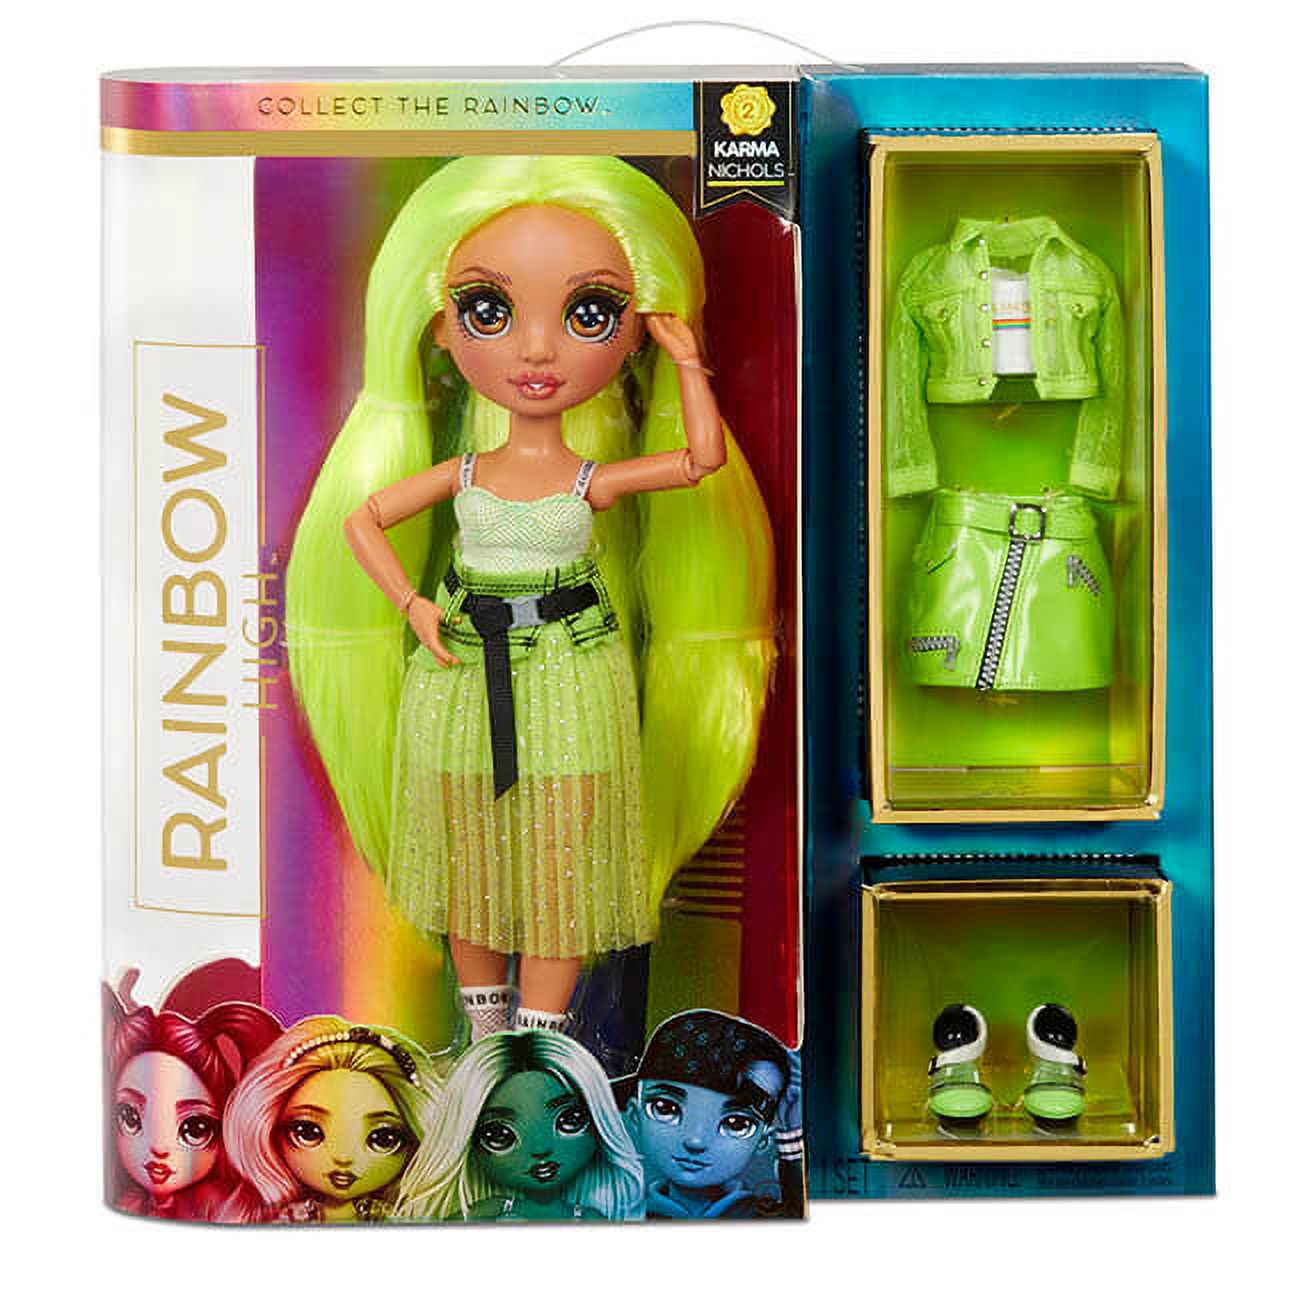 Rainbow High Karma Nichols – Neon Green Fashion Doll with 2 Complete Mix & Match Outfits and Accessories, Toys for Kids 6-12 Years Old - image 3 of 9